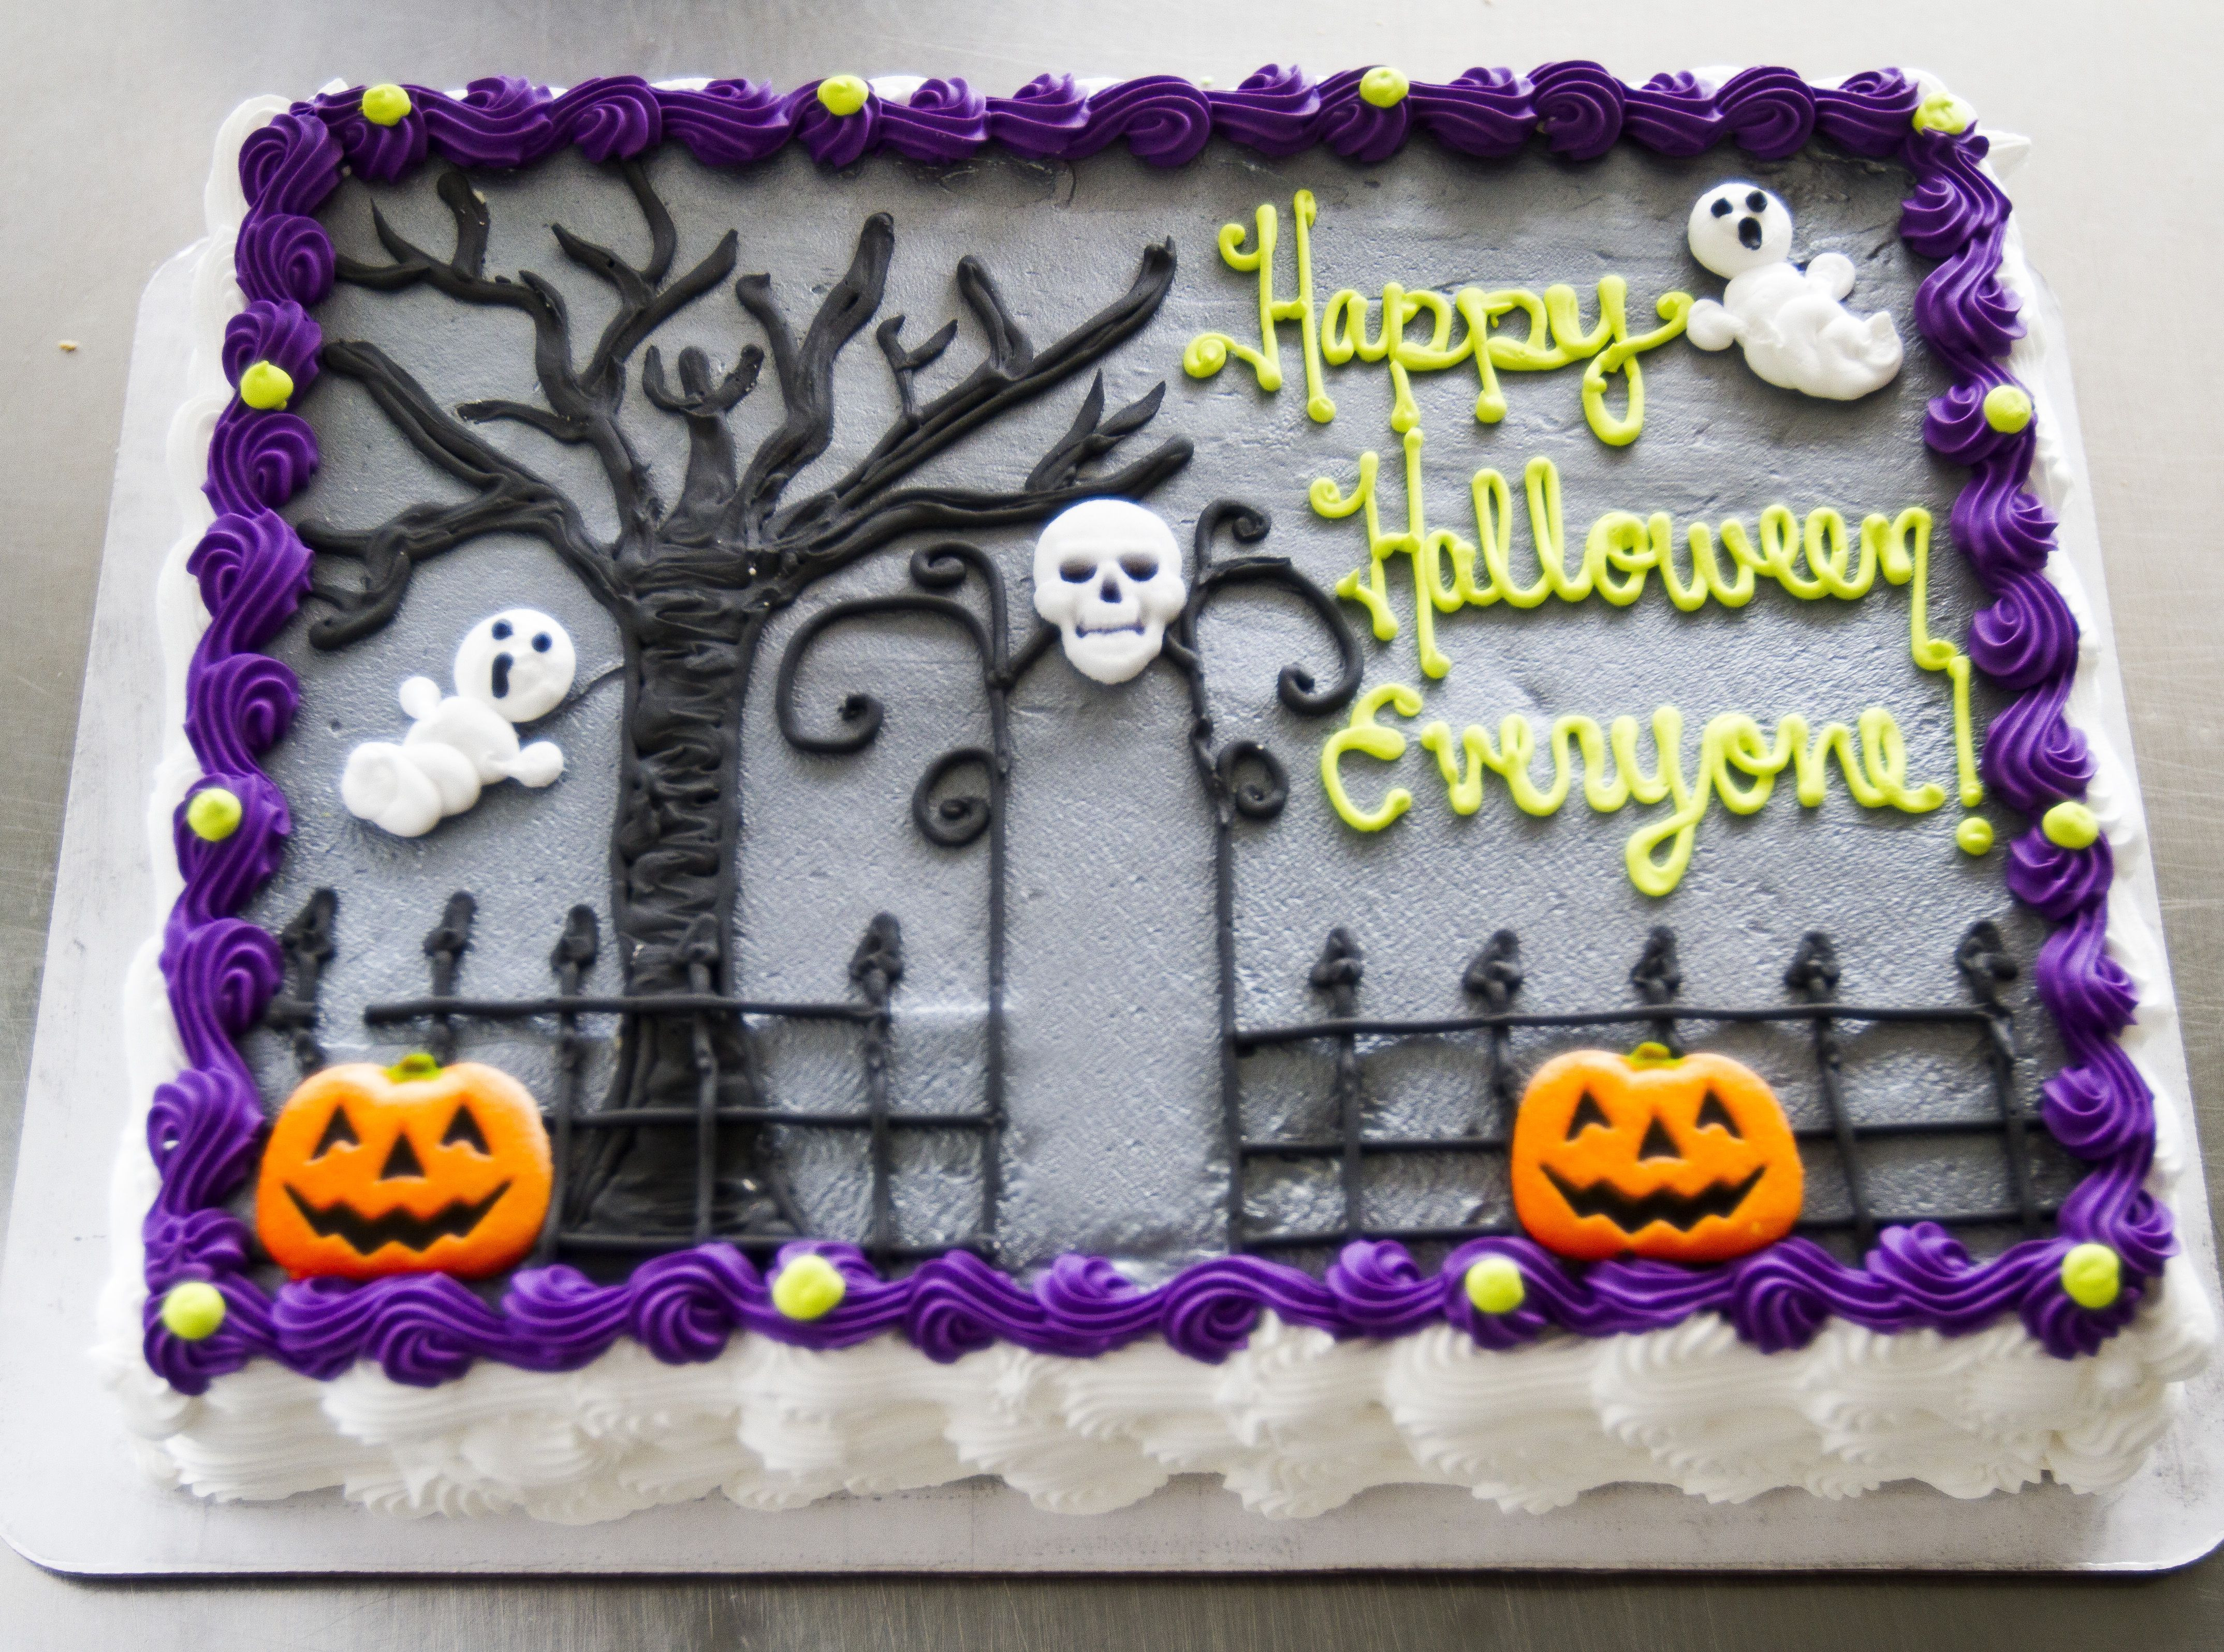 Halloween Sheet Cakes Ideas
 A graveyard cake with ghosts for Halloween Cake 028